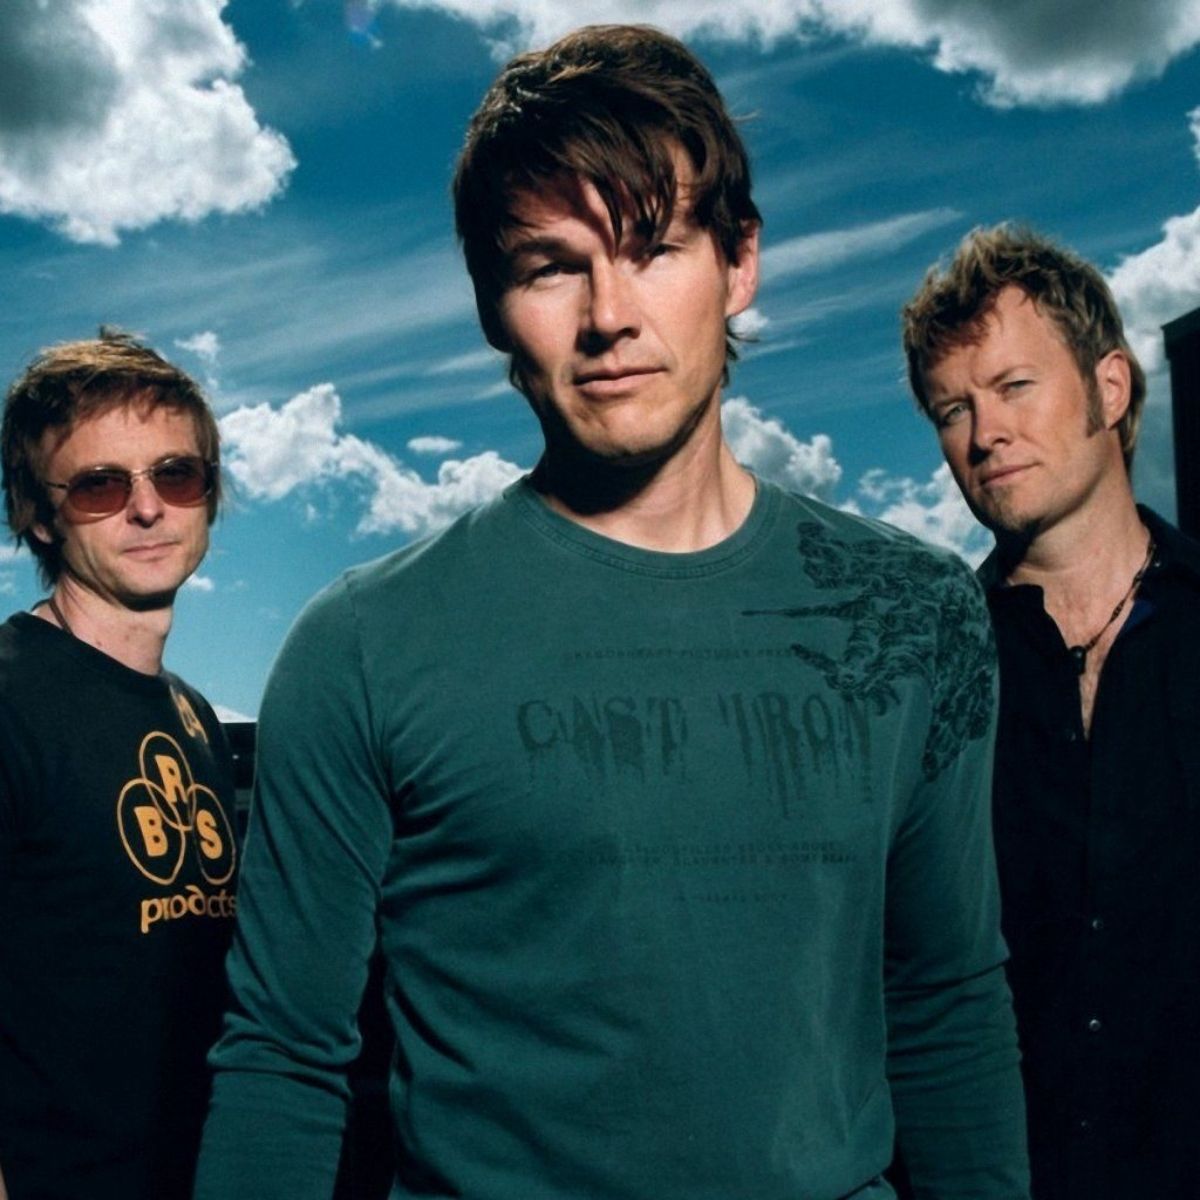 A-ha band nowadays